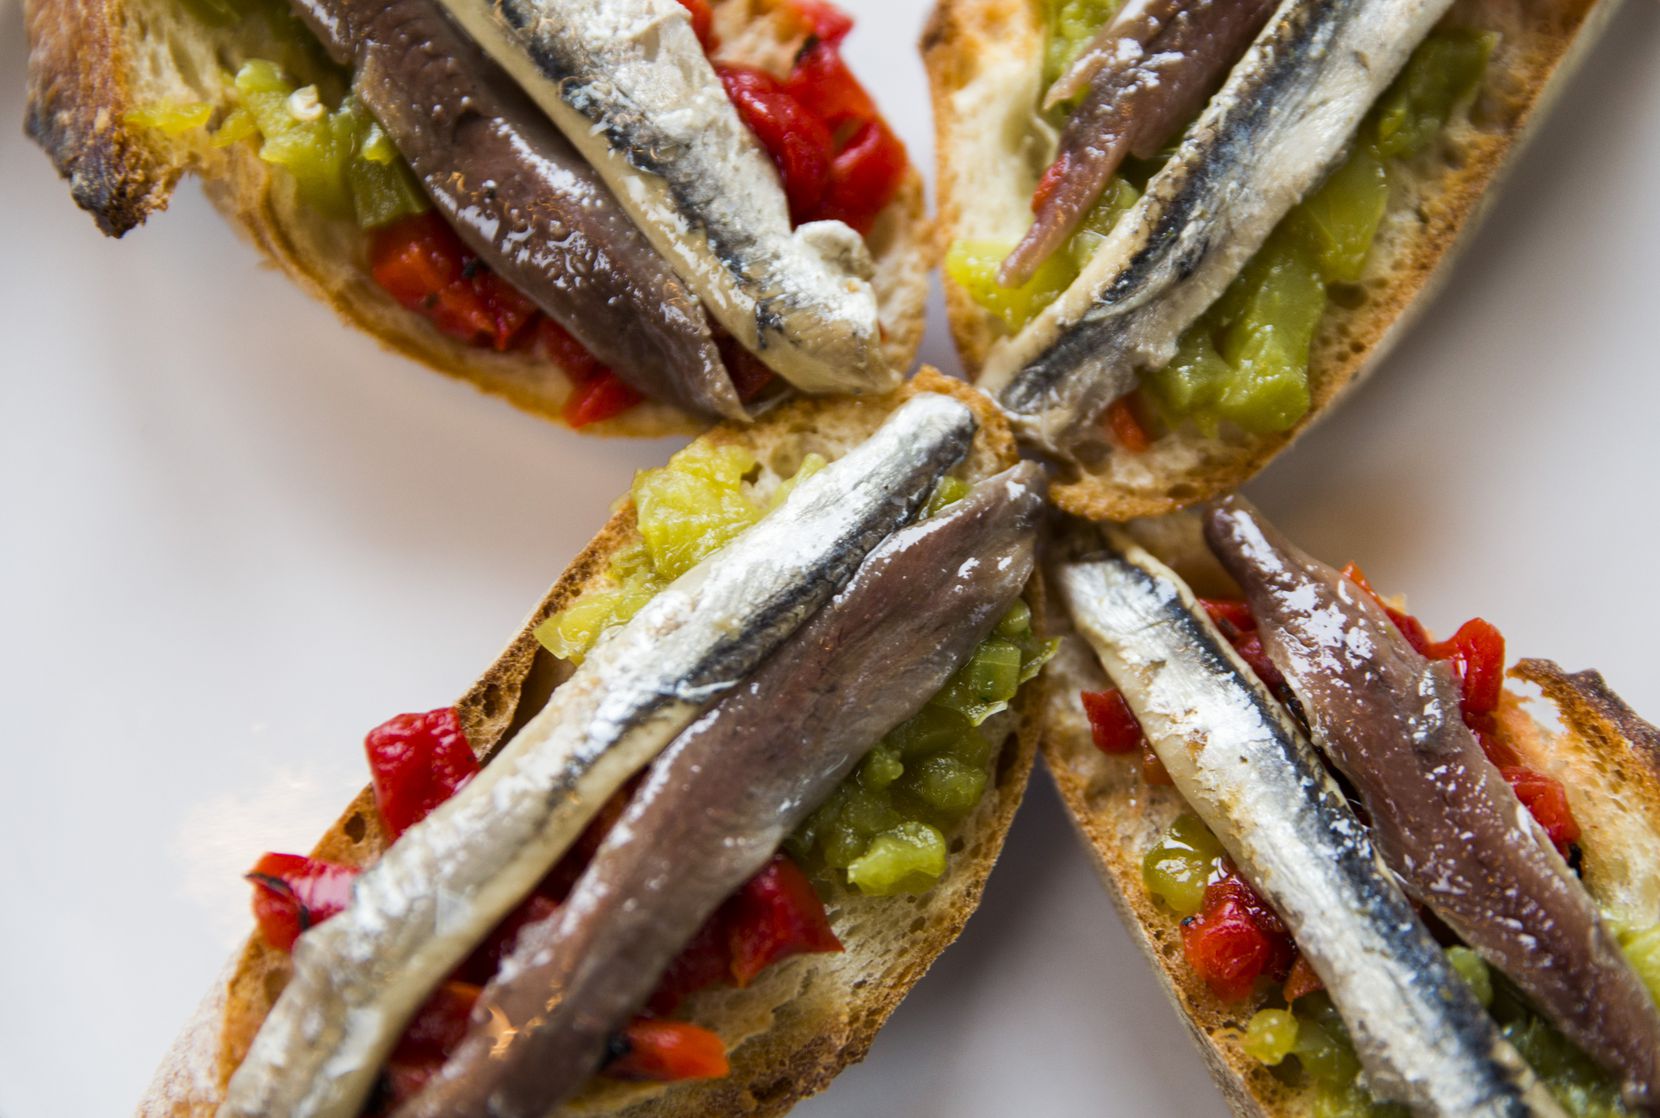 "Matrimonio," or dark and white anchovies on toast, at Sketches of Spain